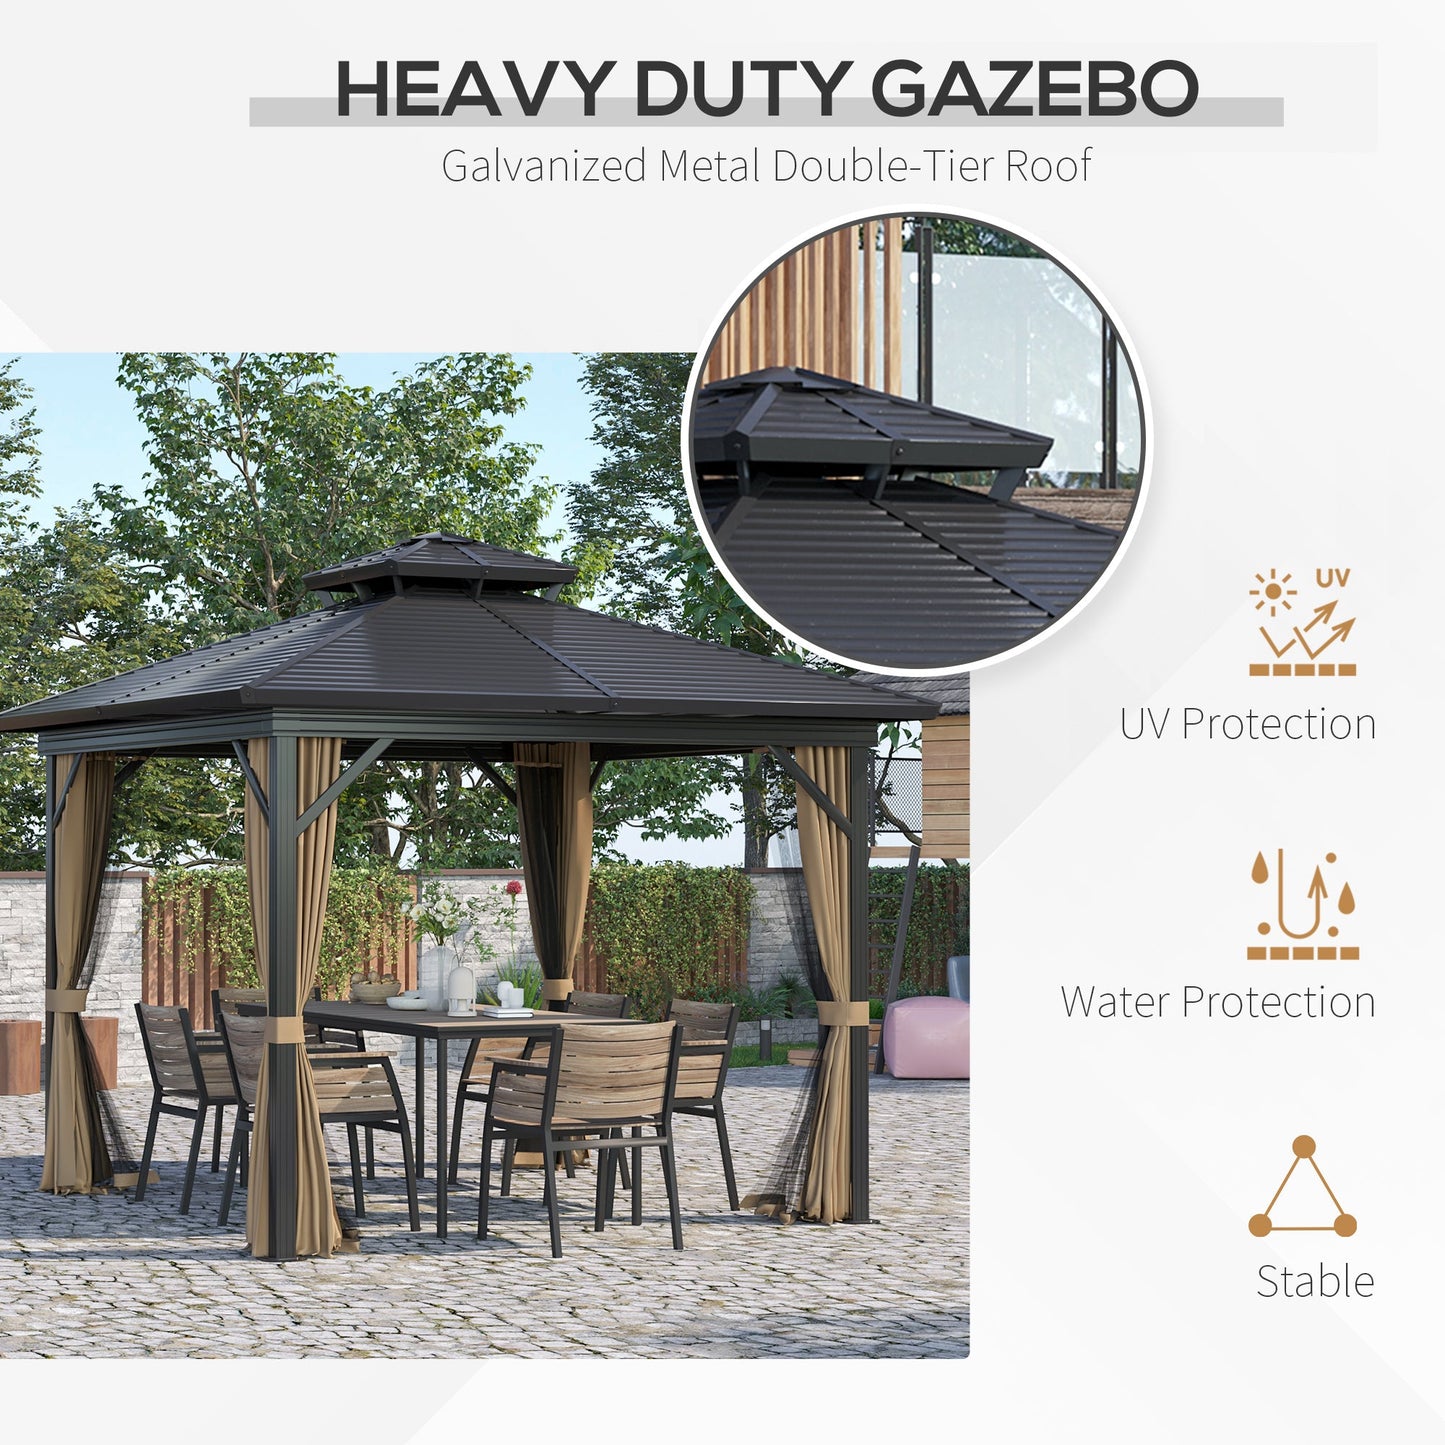 -Outsunny 10' x 10' Hardtop Gazebo with Aluminum Frame, Double Roof Outdoor Gazebo Canopy, Curtains and Netting included for Garden, Backyard - Outdoor Style Company